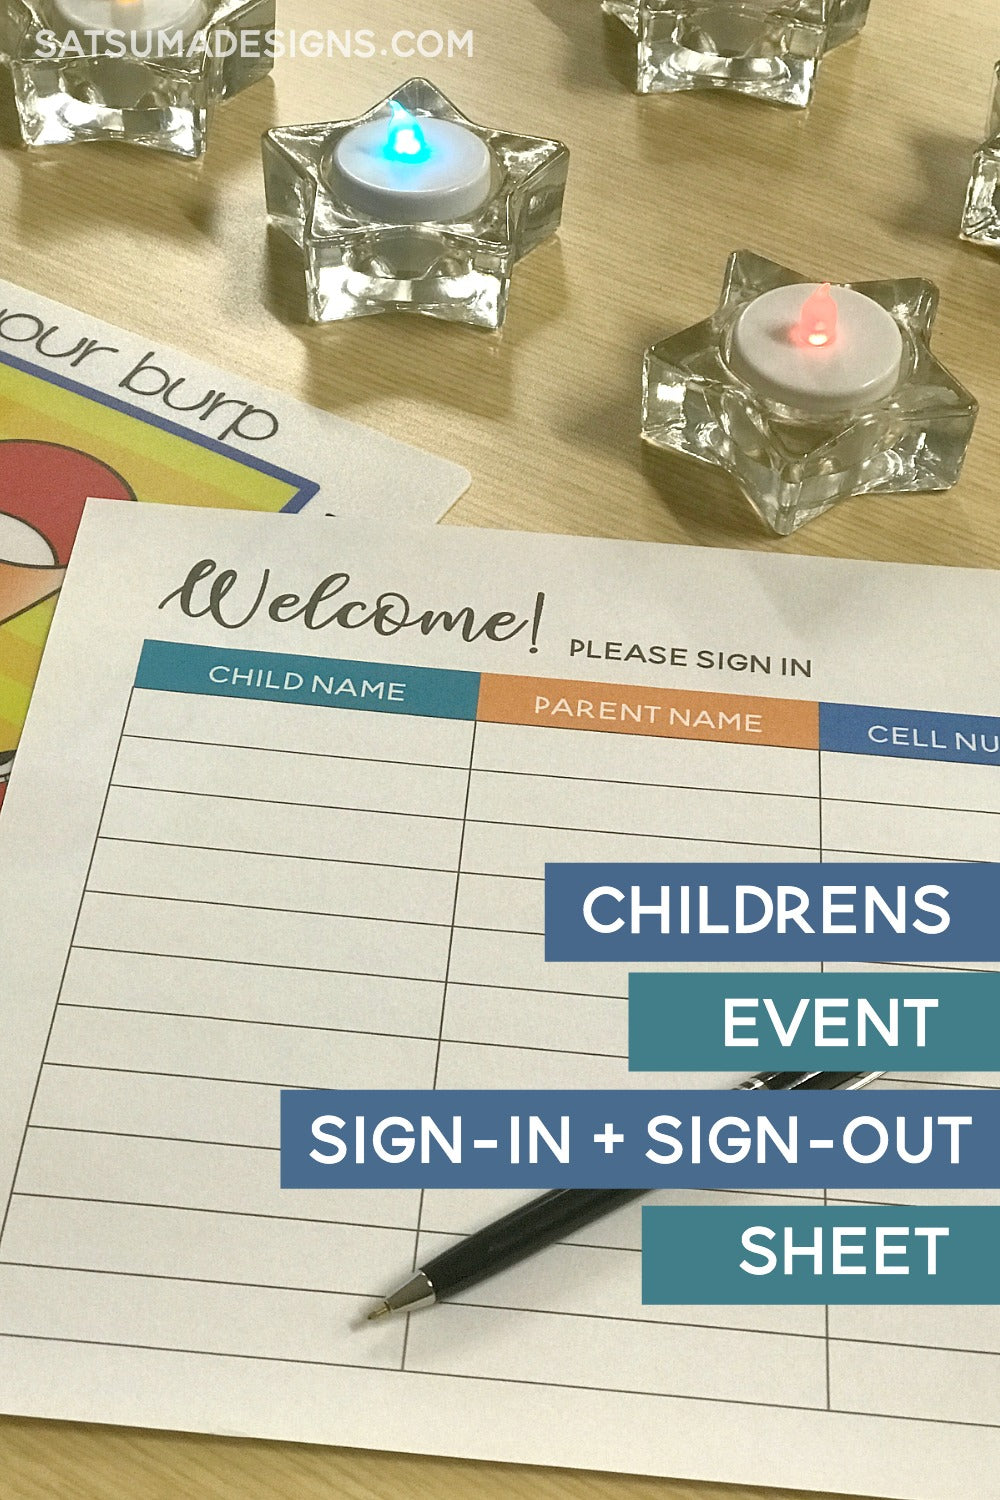 If you host children's birthday parties or other kinds of parties, you need this printable! Get my free children's event management sign-in and sign-out sheet printable so you have all guests' phone numbers at hand for any emergency big or small. #partyplanning #emergencycontact #ICE #printable #partyprintable #groupevents